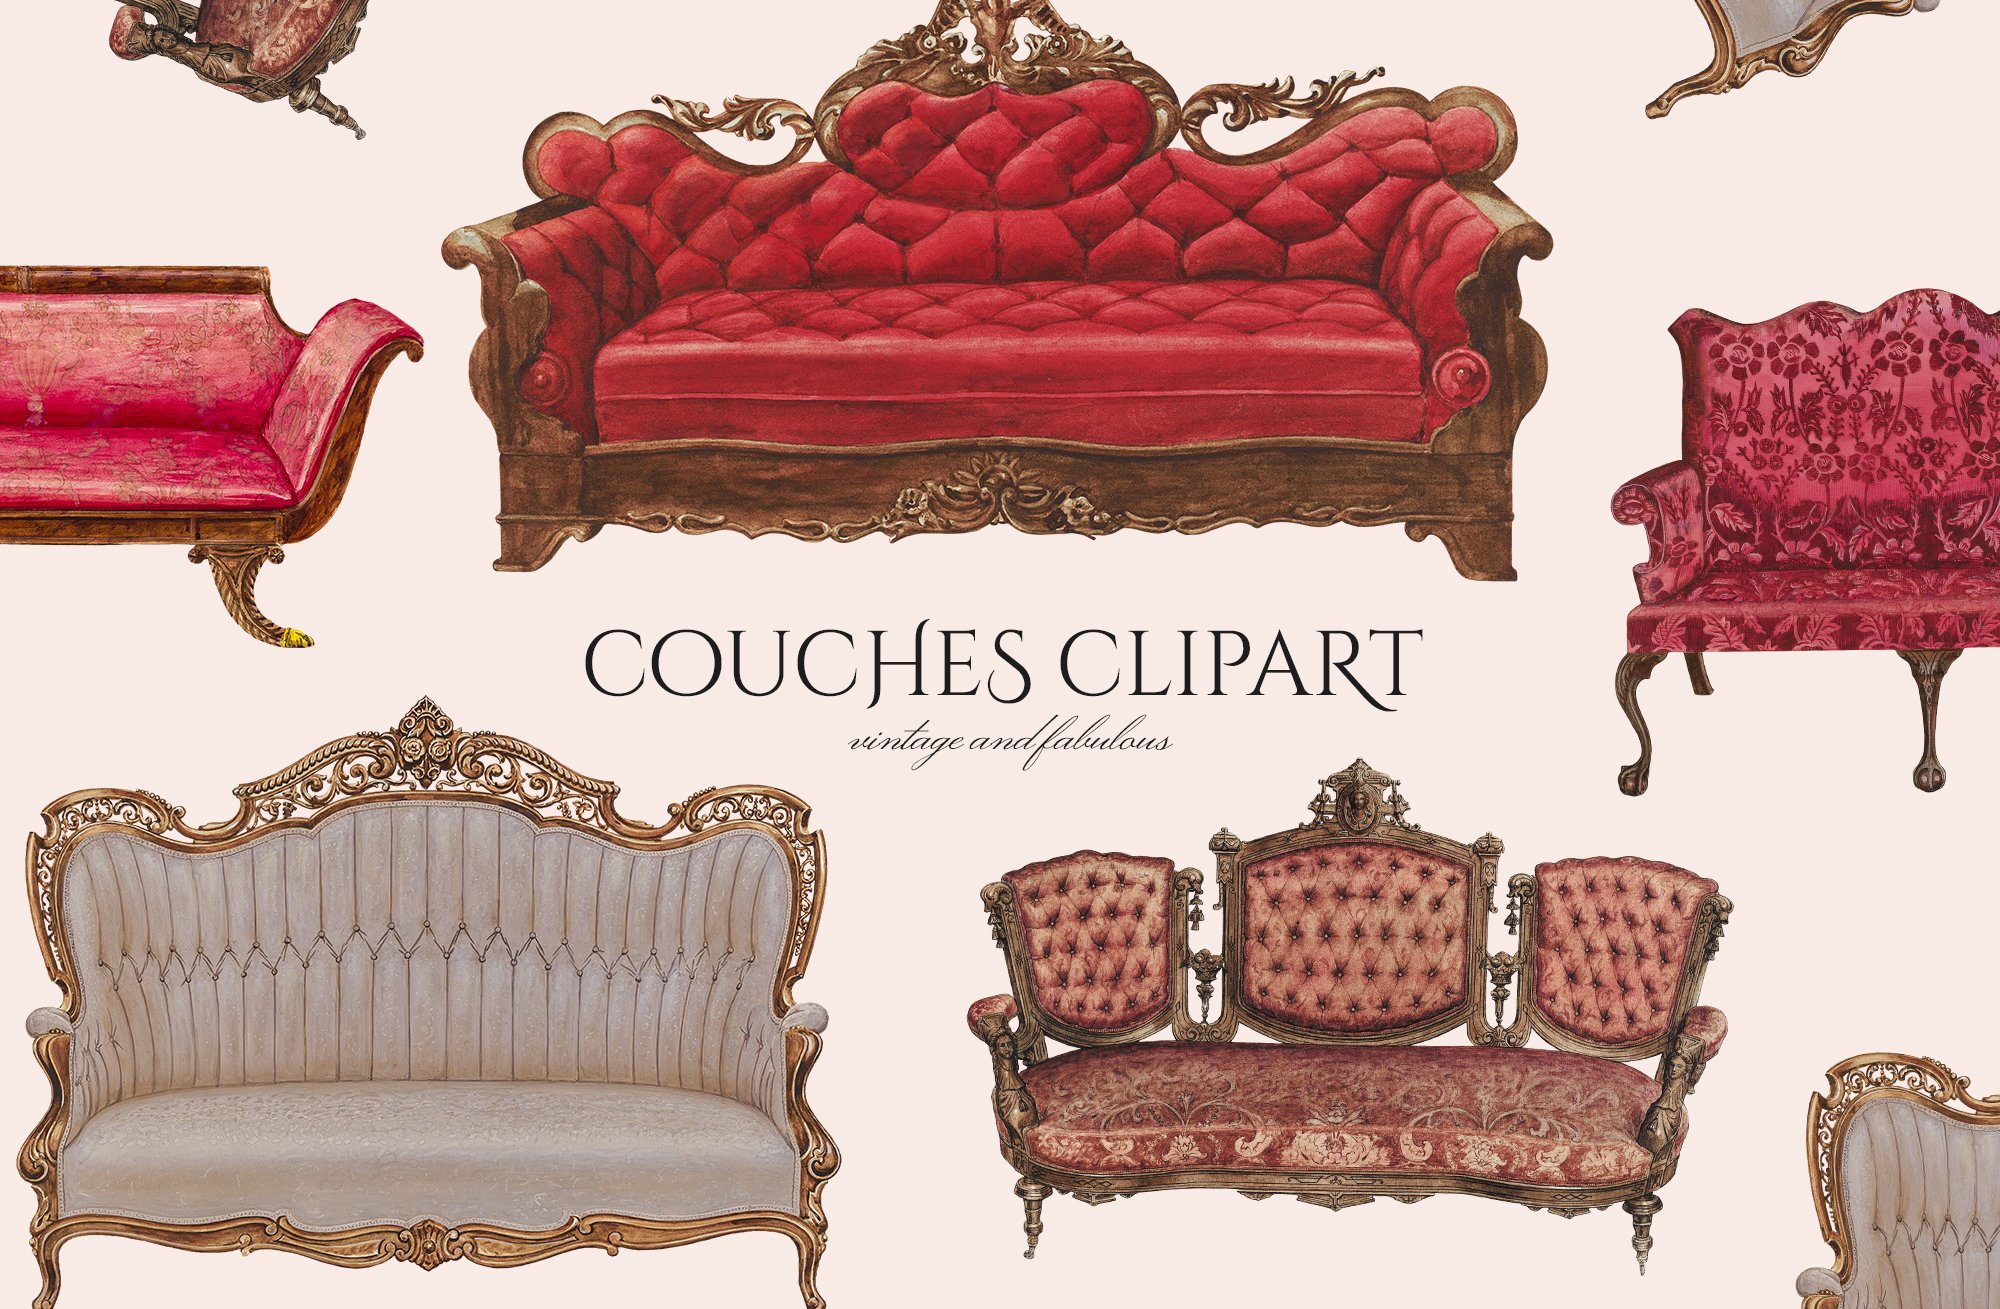 Vintage Couch & Sofa Clipart cover image.